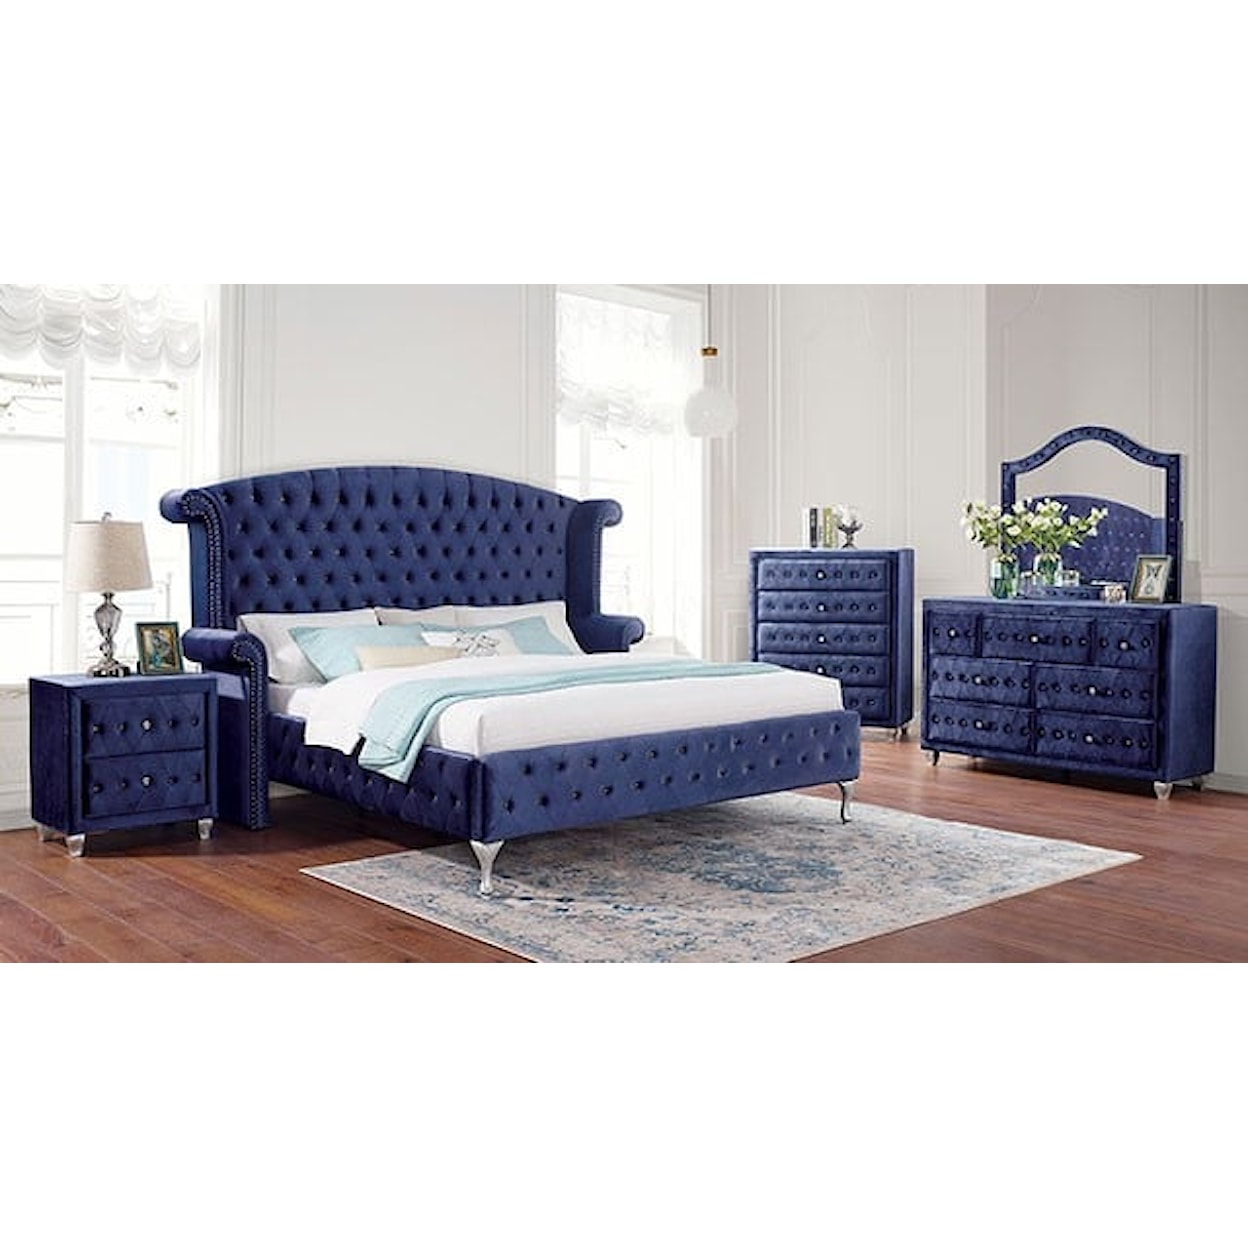 Furniture of America Alzir 5 Pc. Queen Bedroom Set w/ Chest